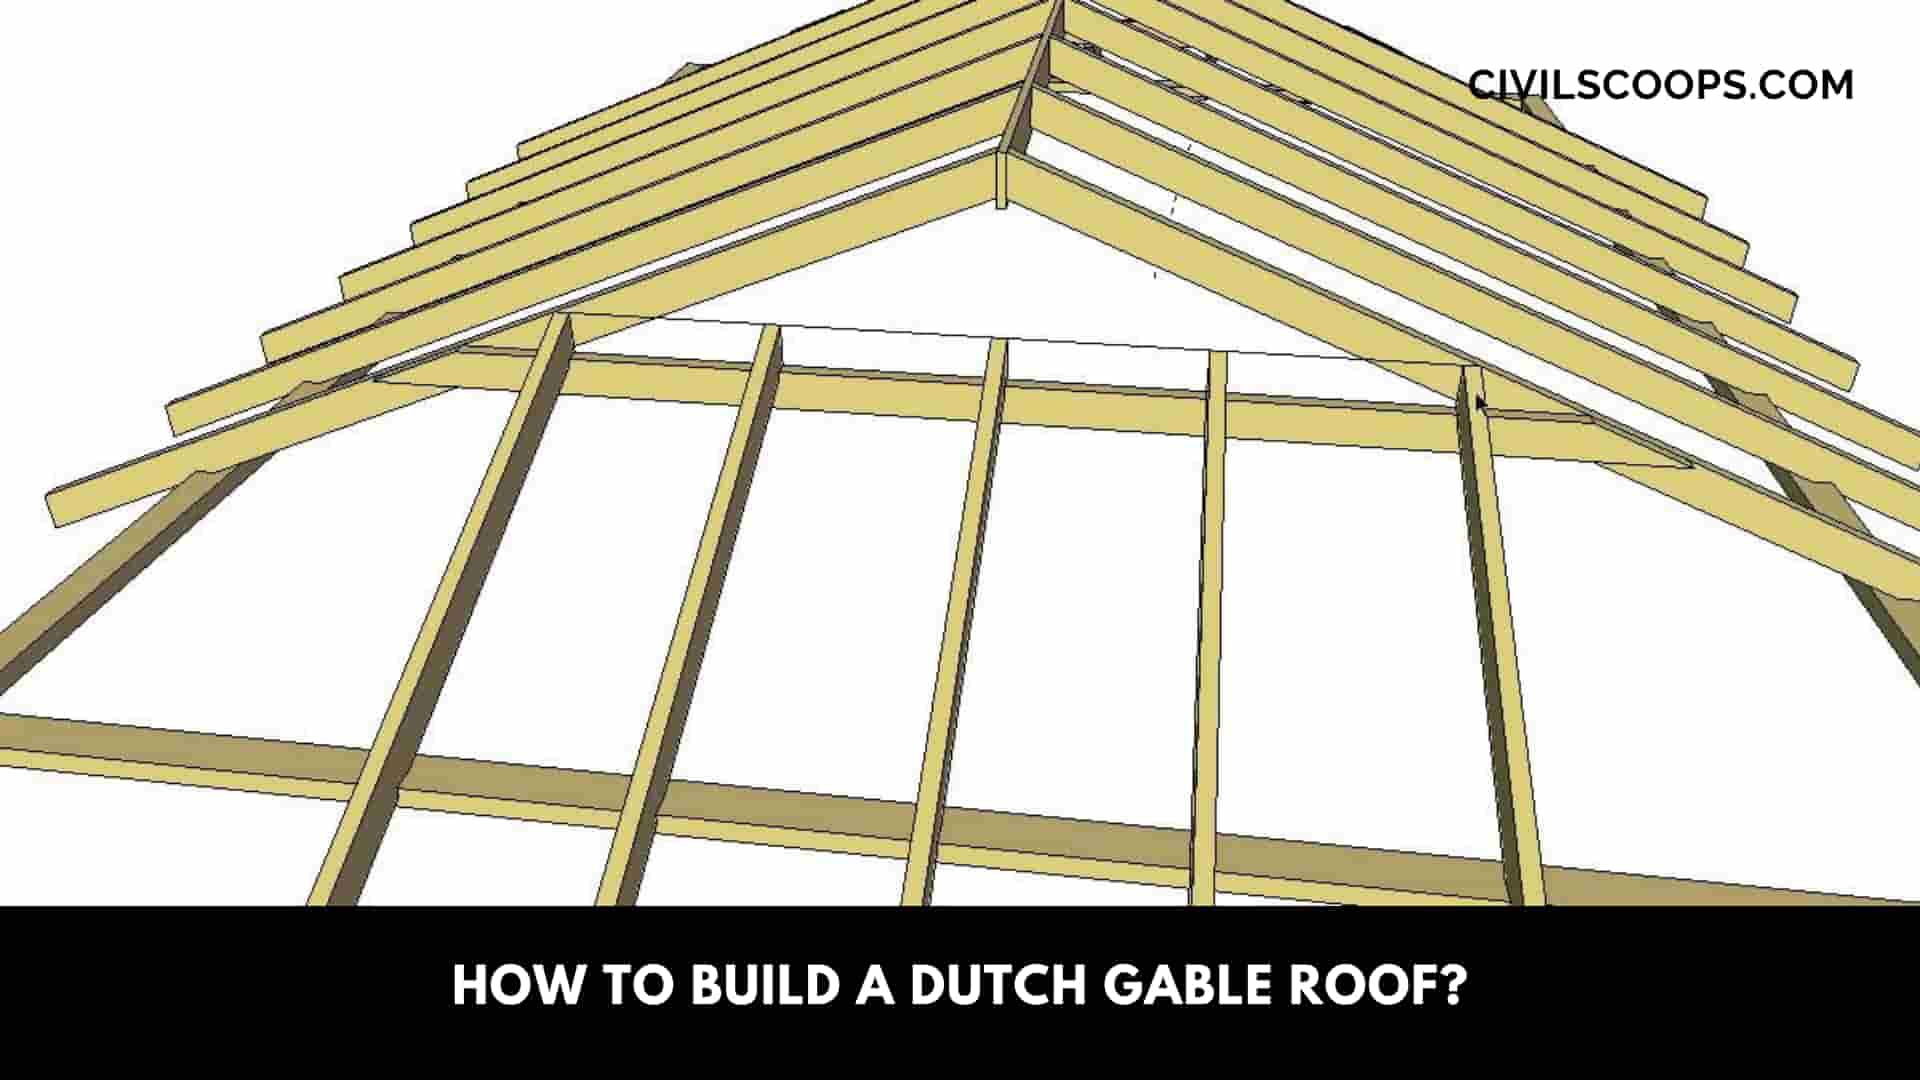 How to Build a Dutch Gable Roof?